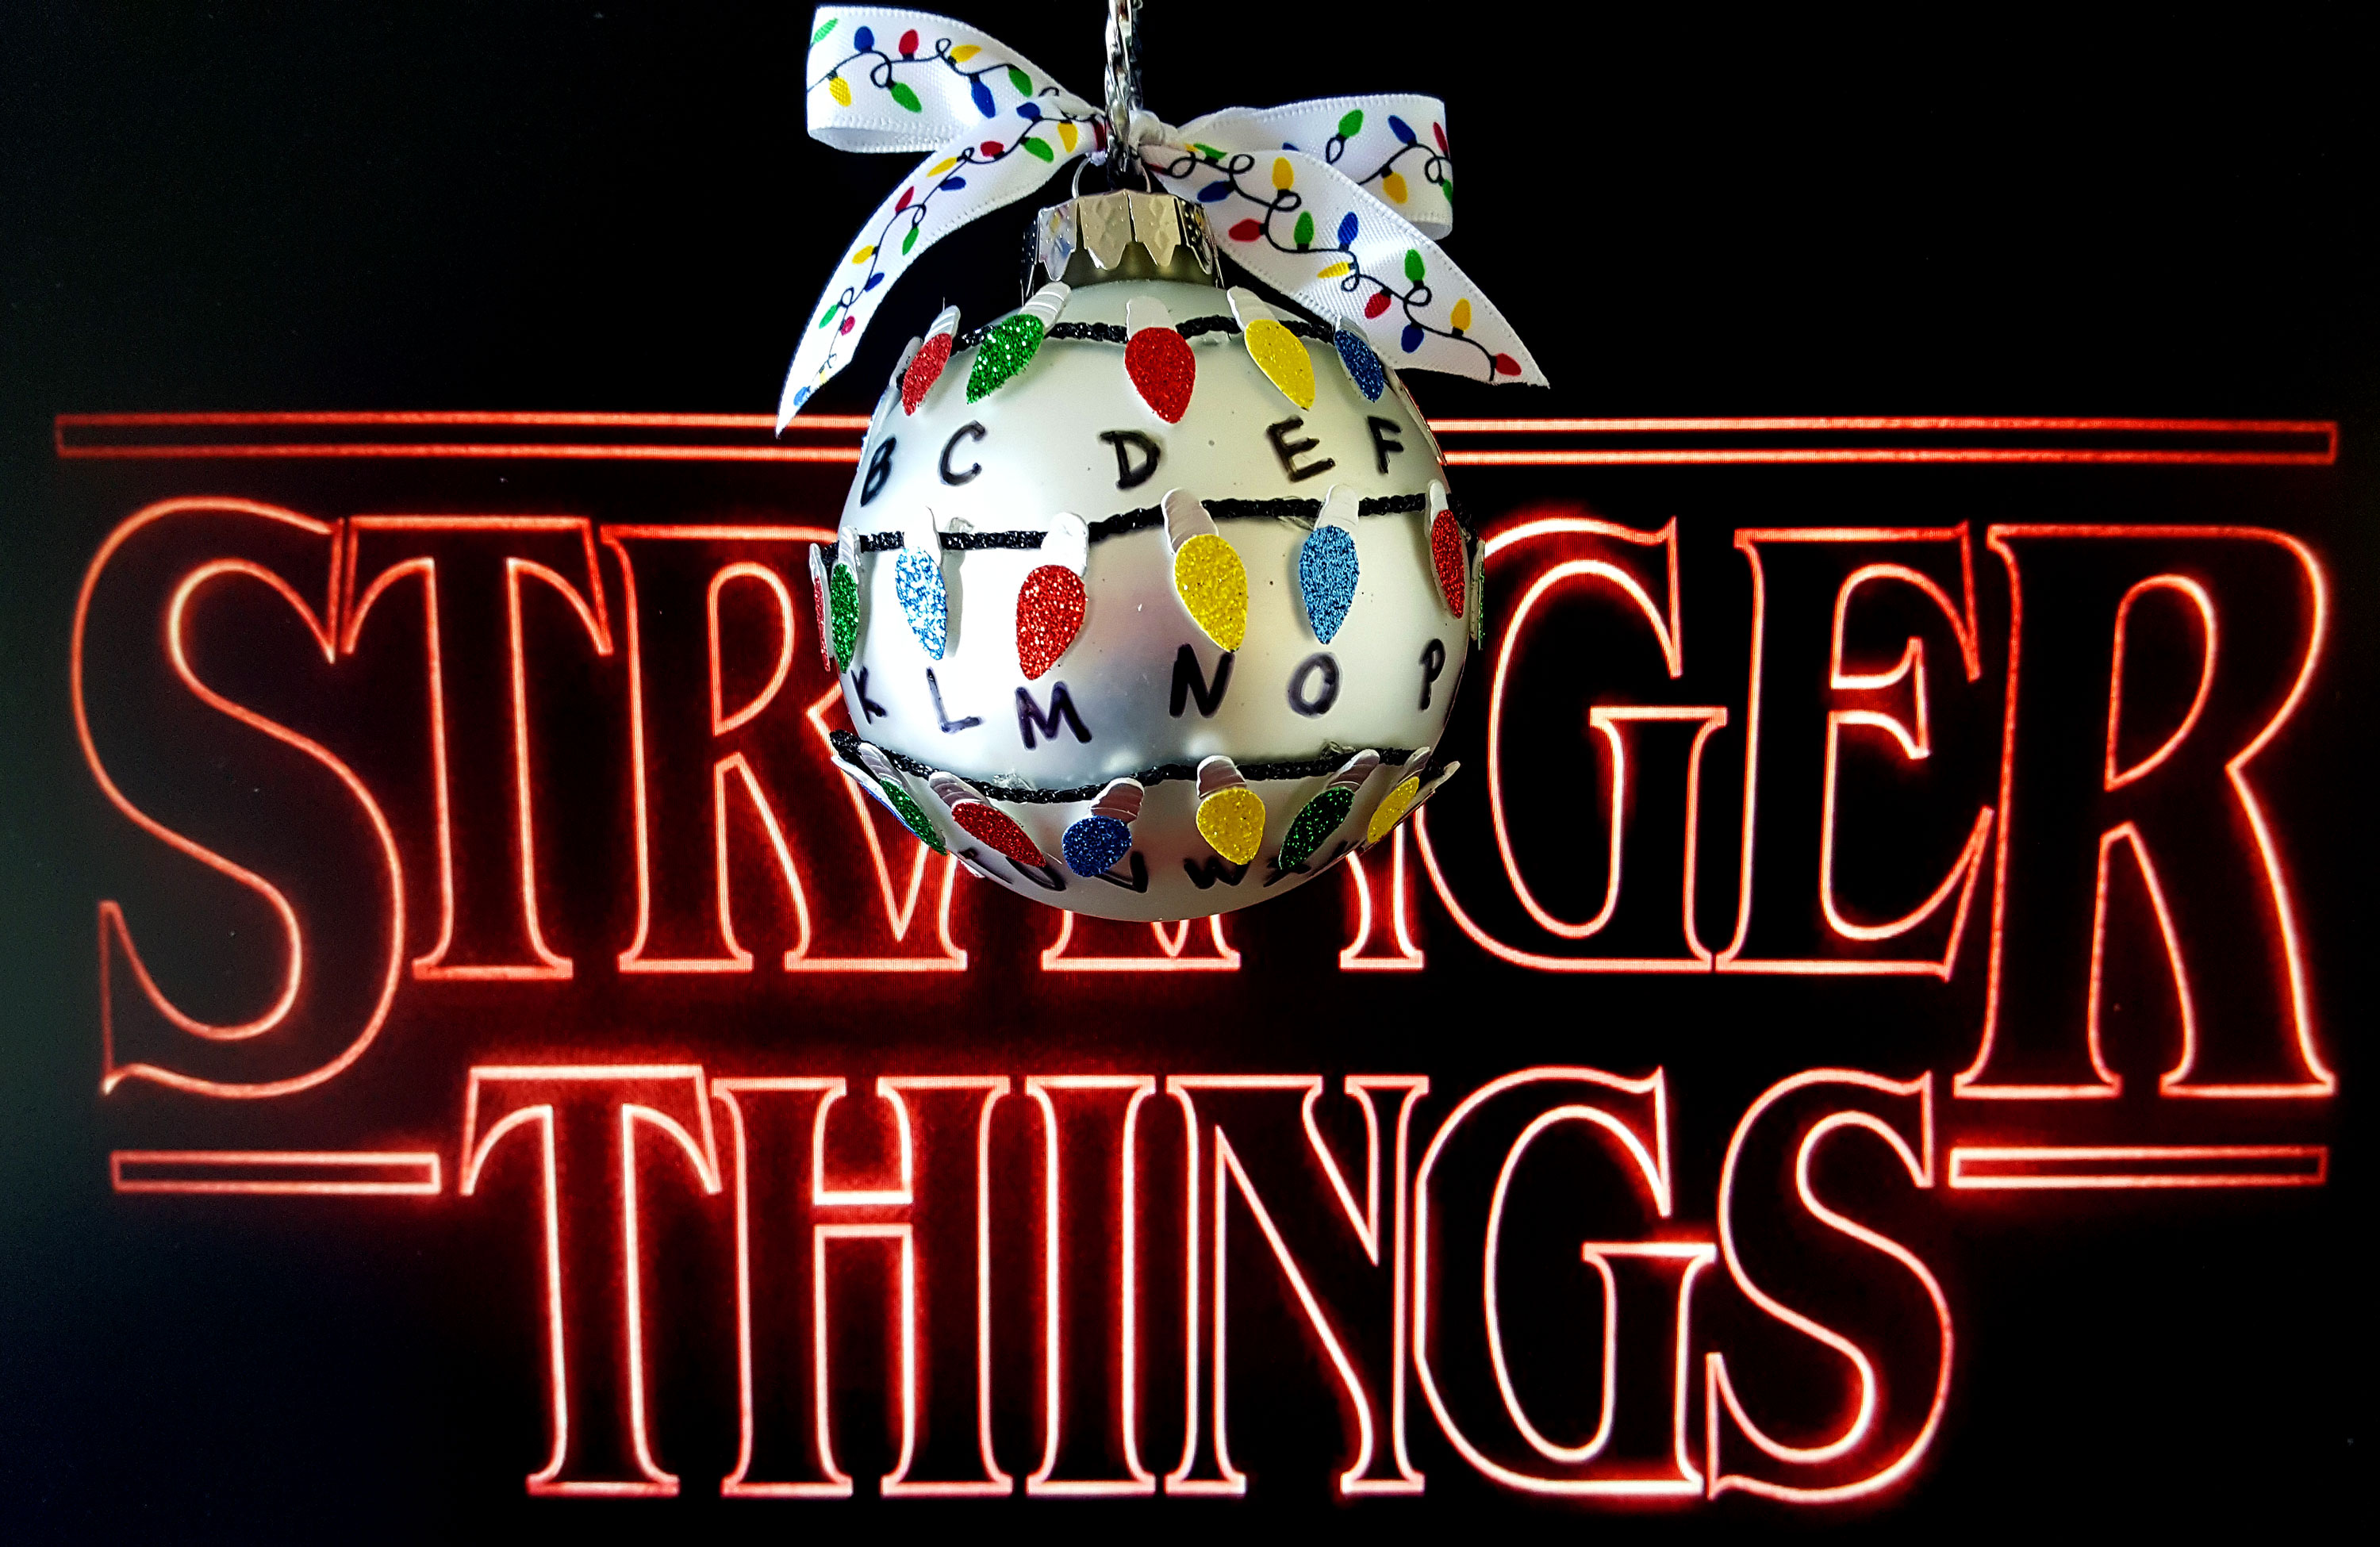 A Netflix Stranger Things ornament with lights and alphabet. | OrnamentShop.com